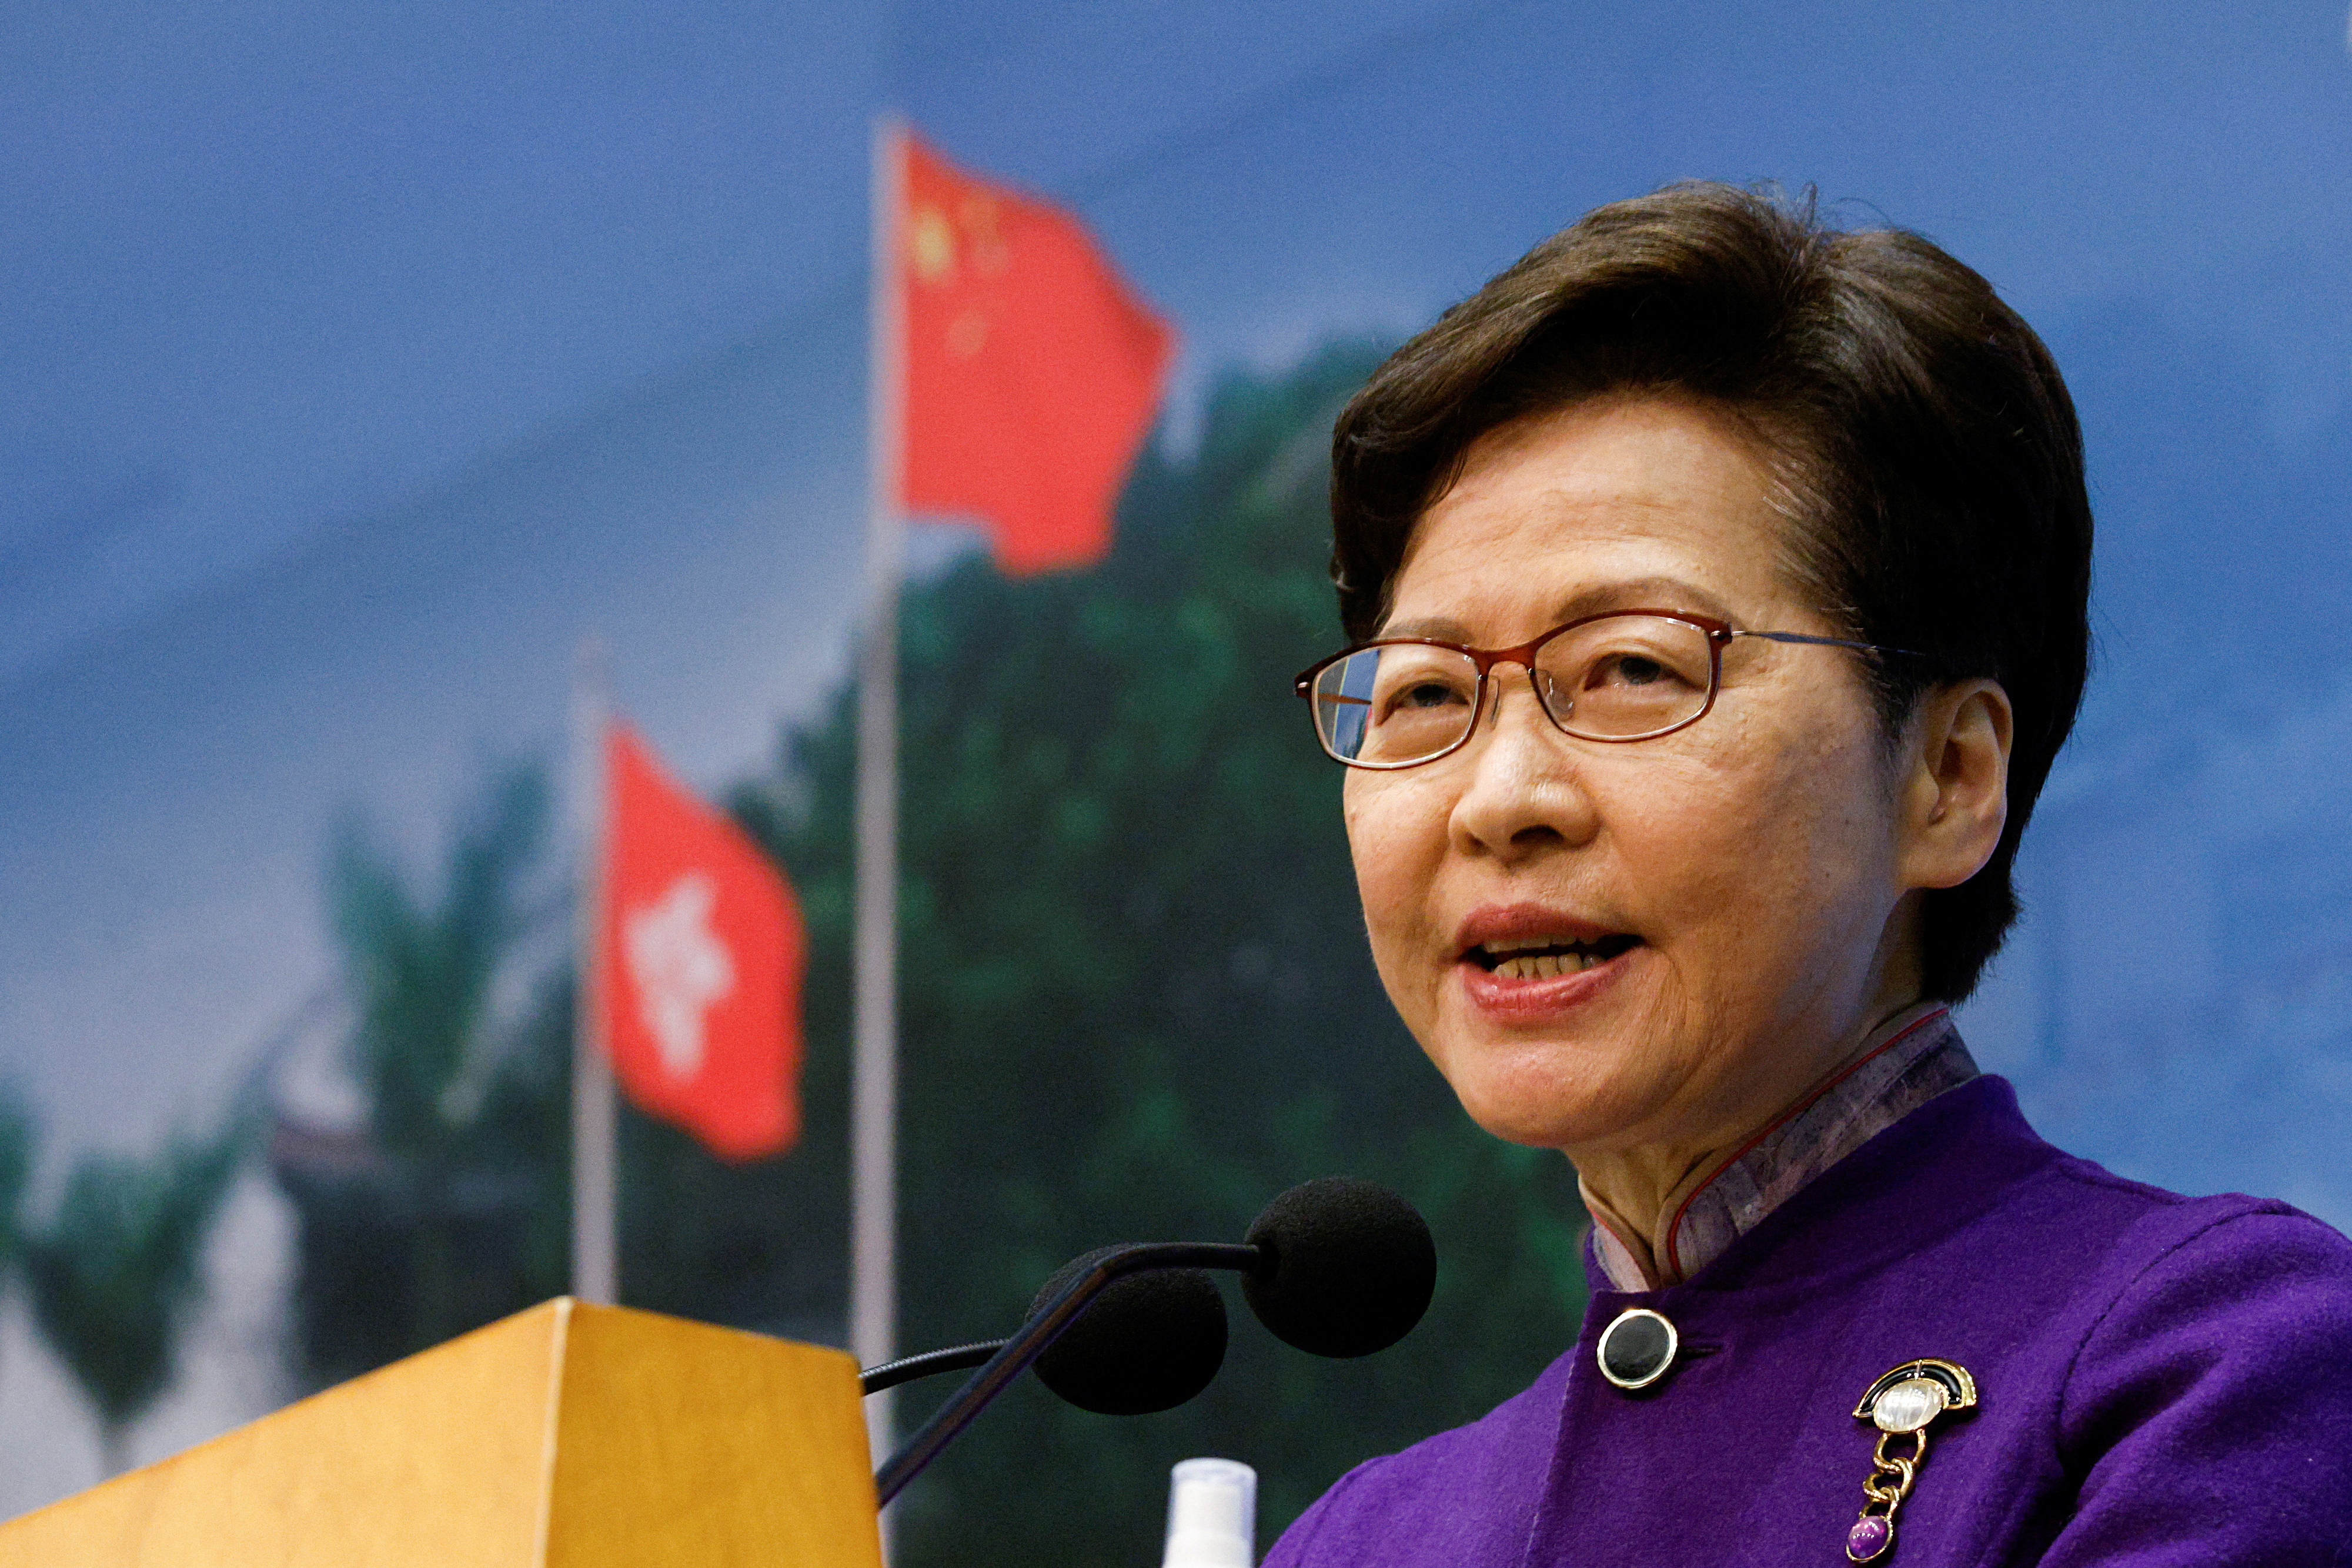 Hong Kong Chief Executive Carrie Lam speaks during a news conference after the Legislative Council election in Hong Kong